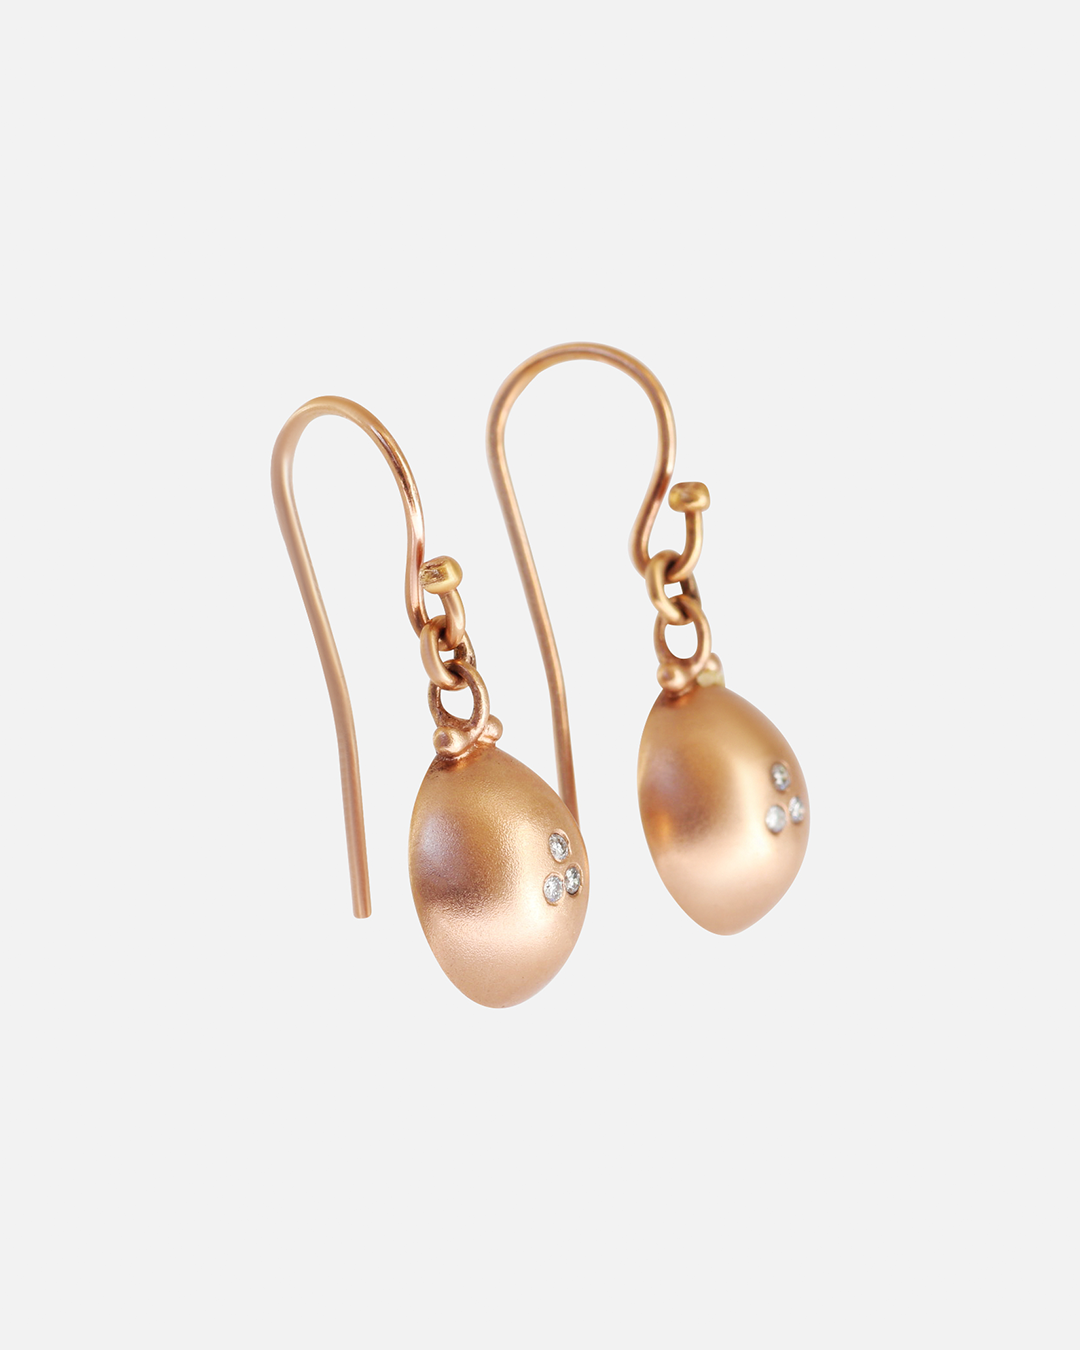 Eggplant / Rose Gold + Diamond Earrings By fitzgerald jewelry